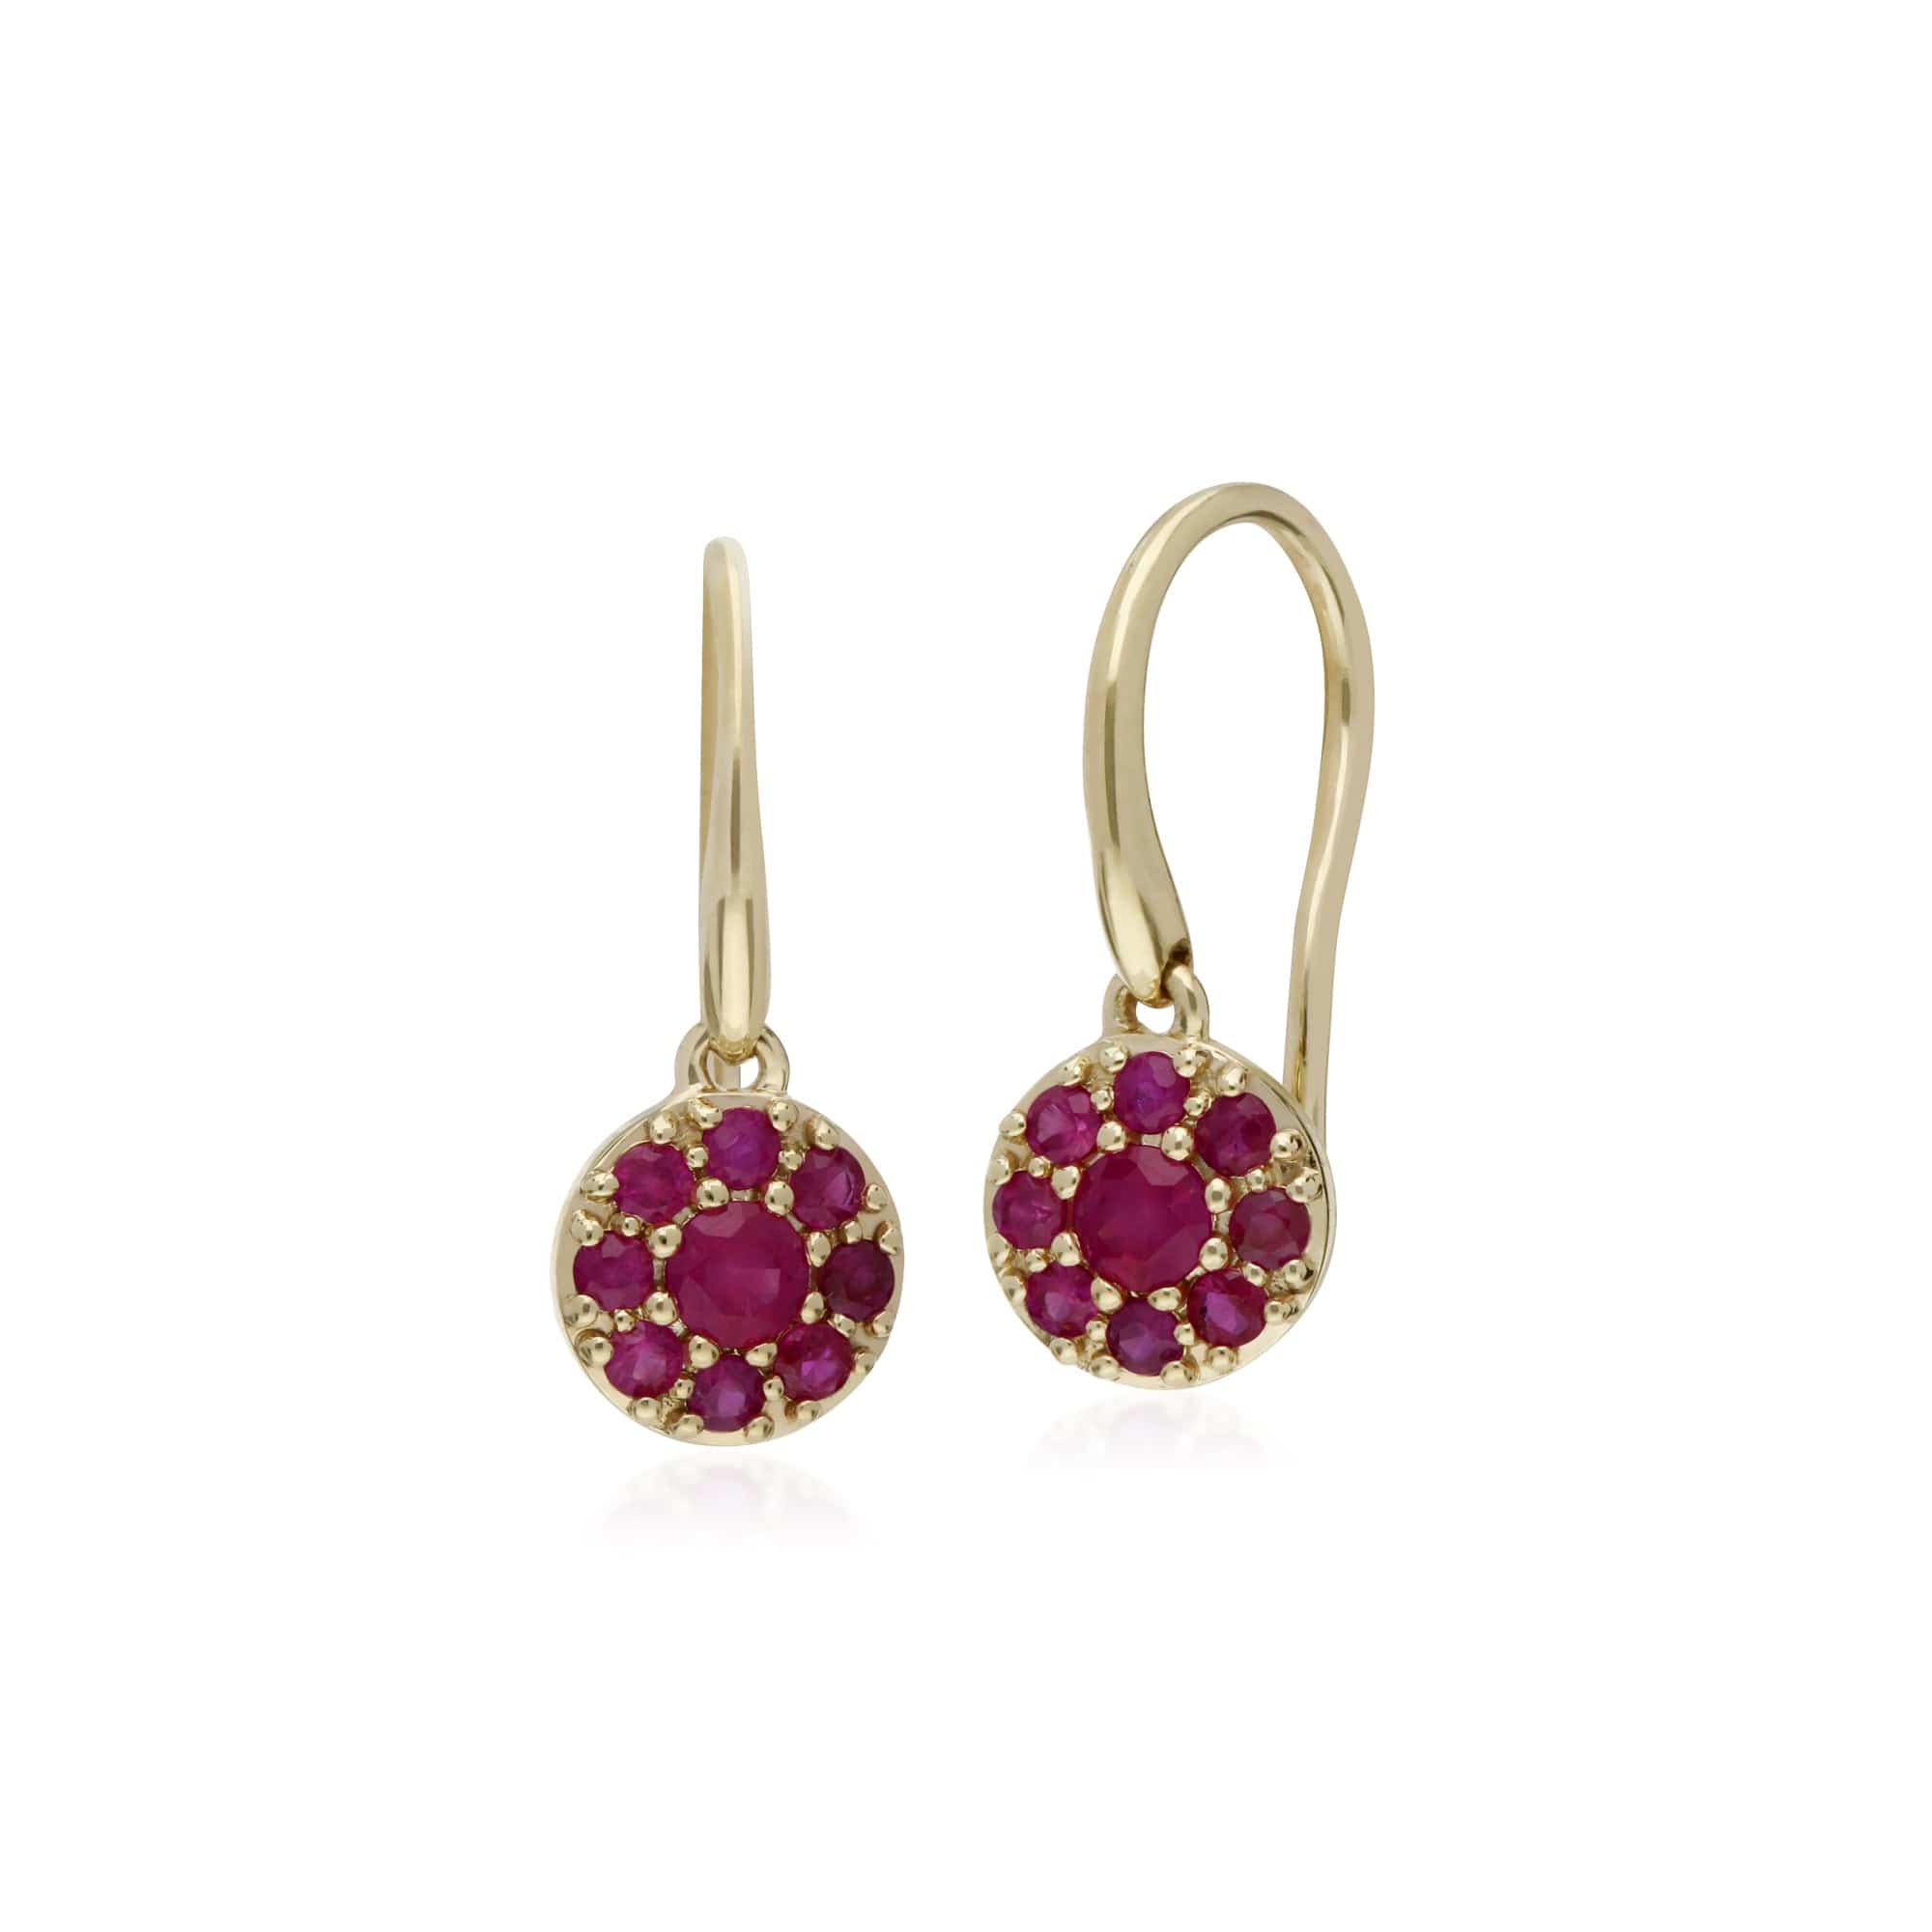 135E1573019-135P1910019 Classic Round Ruby Cluster Drop Earrings & Pendant Set in 9ct Yellow Gold 2